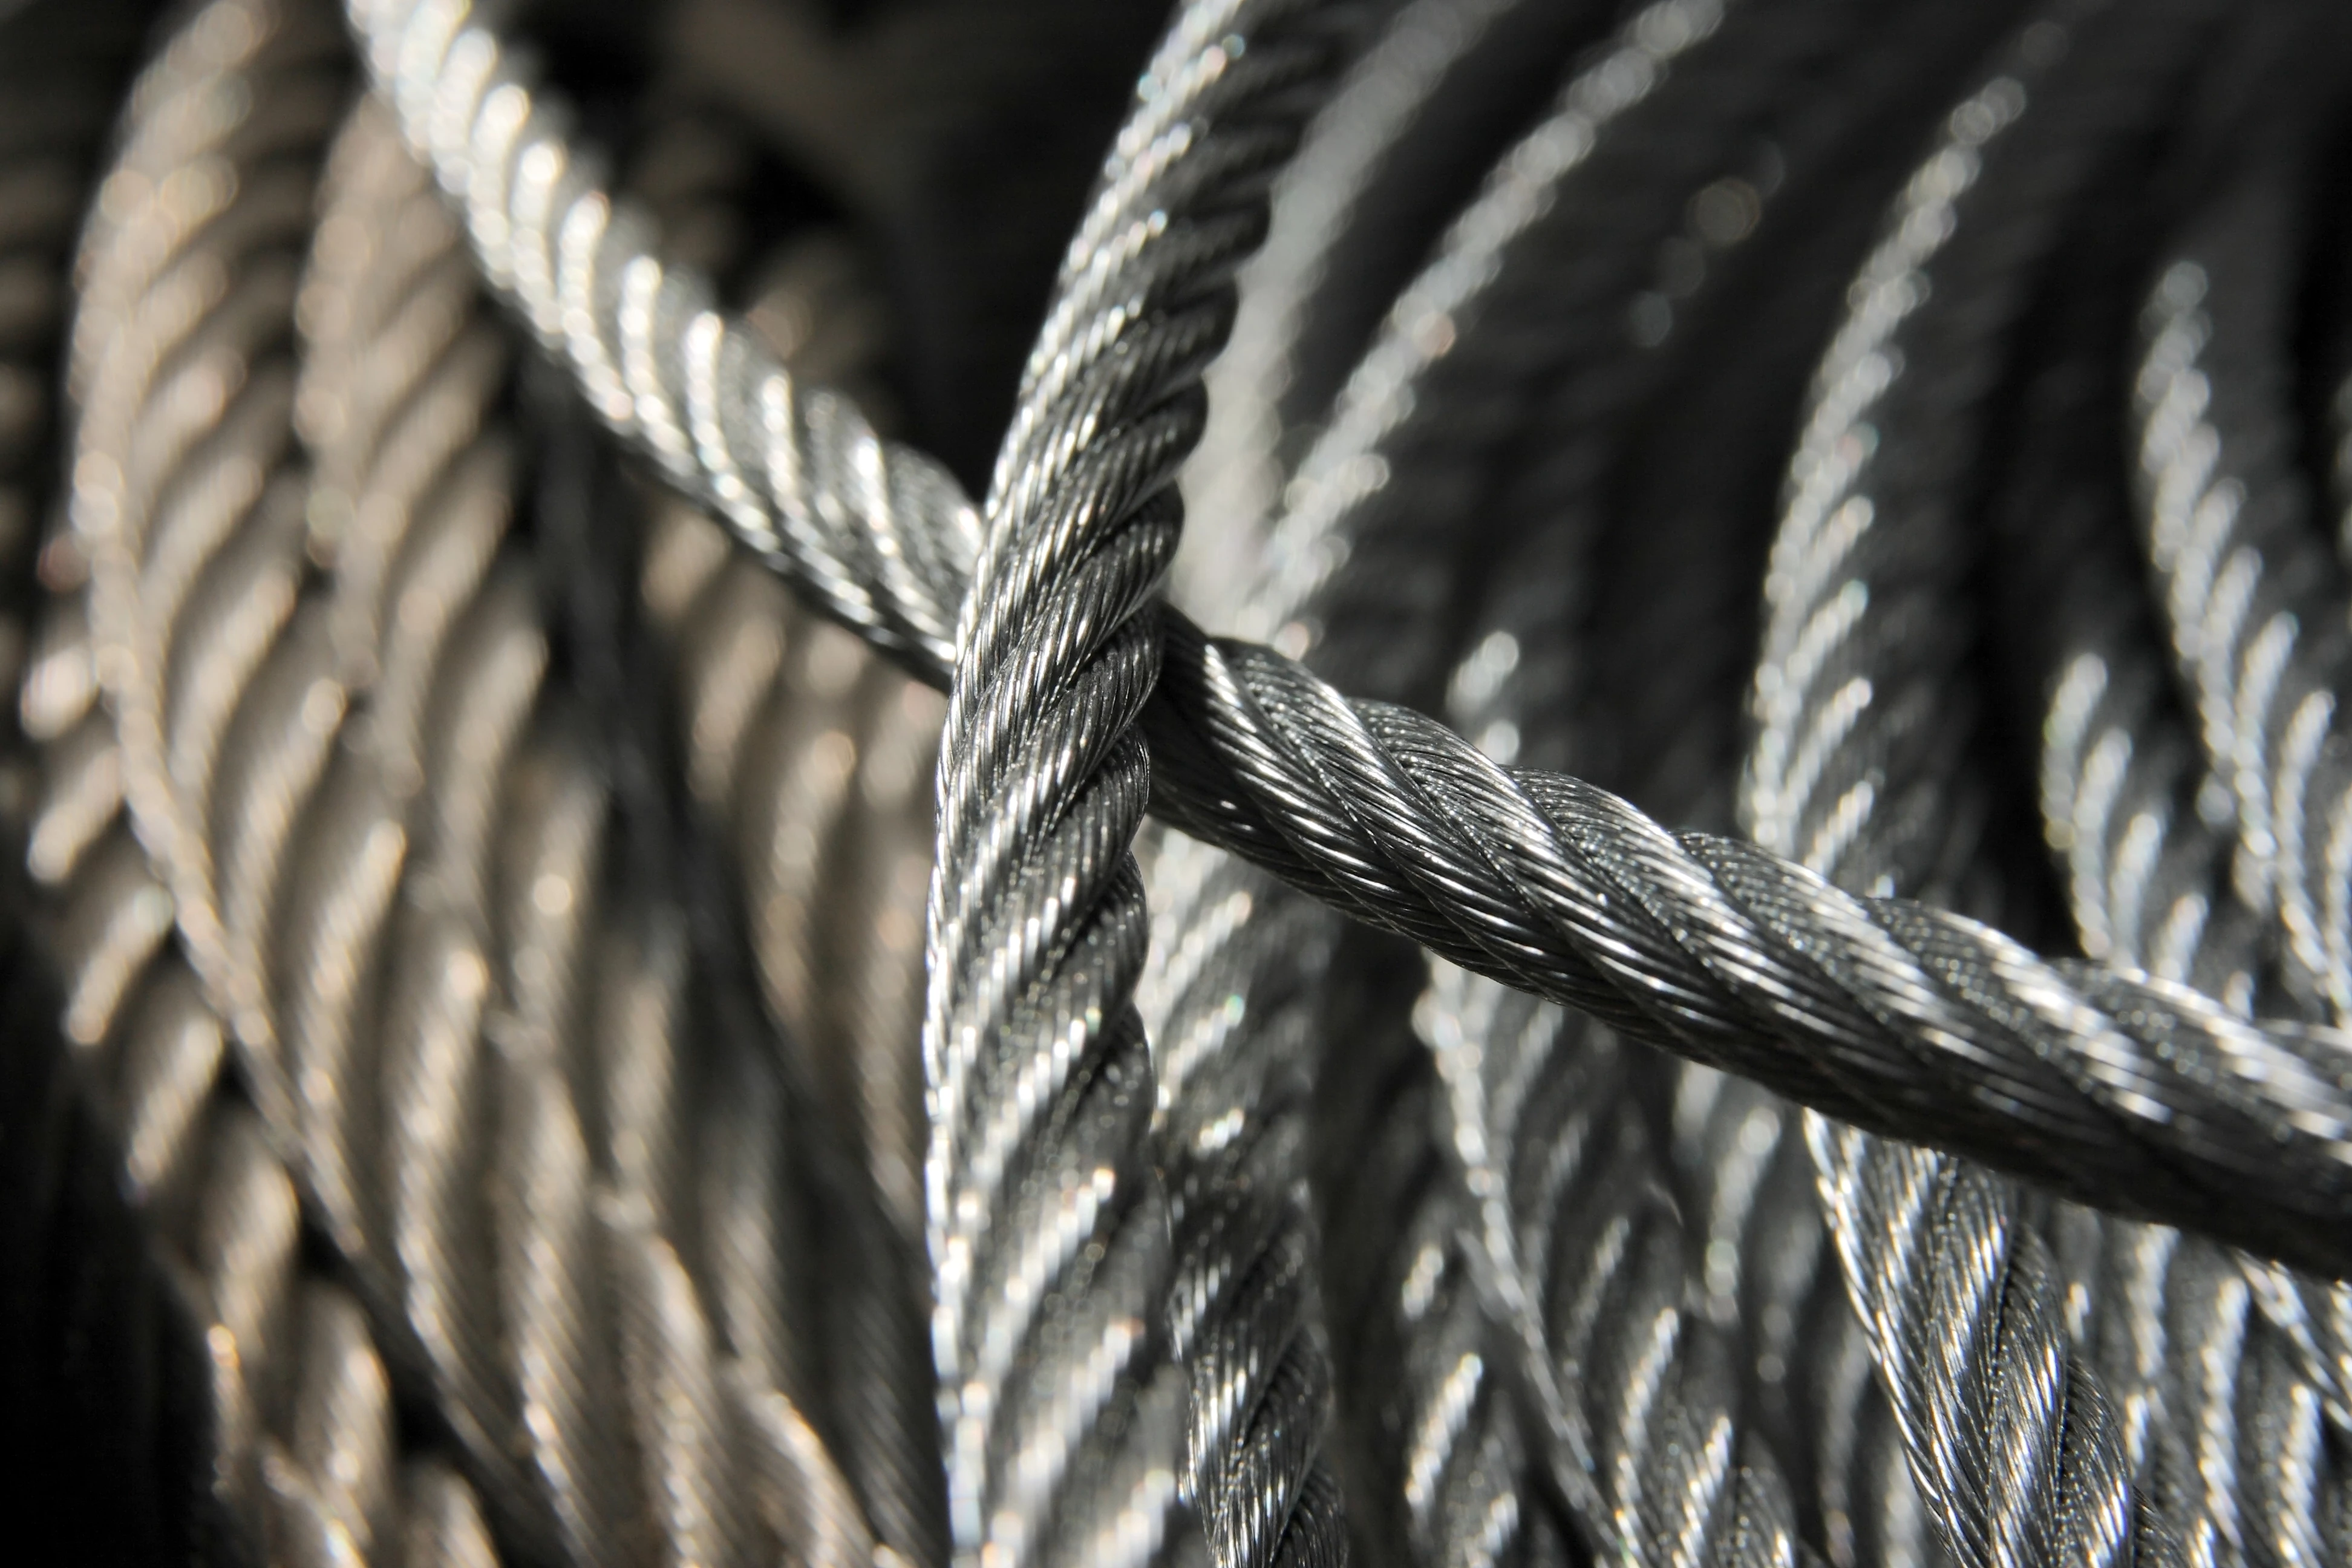 Product Category: Steel wire rope